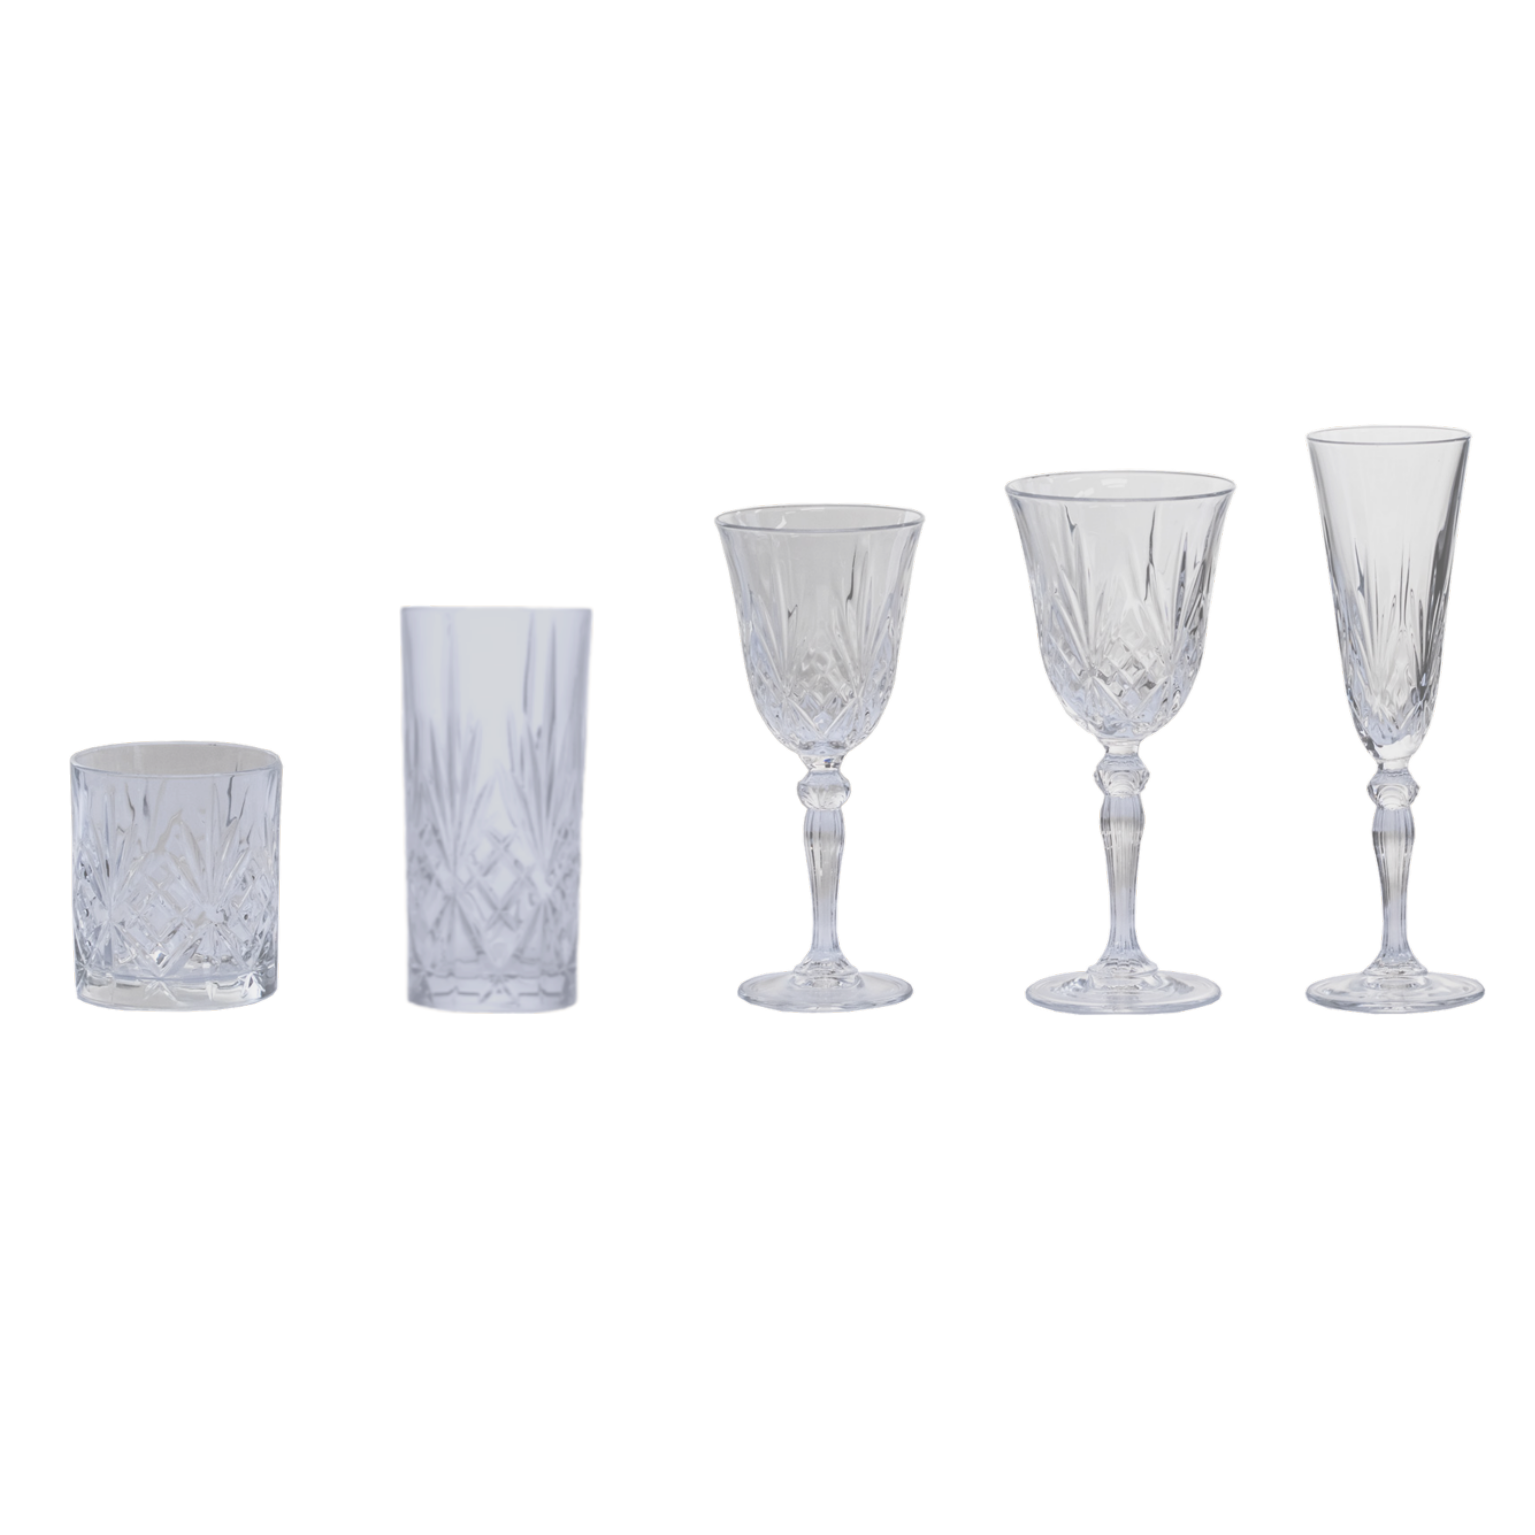 GOBLET Melodia Wine cl 21 (24 each container)